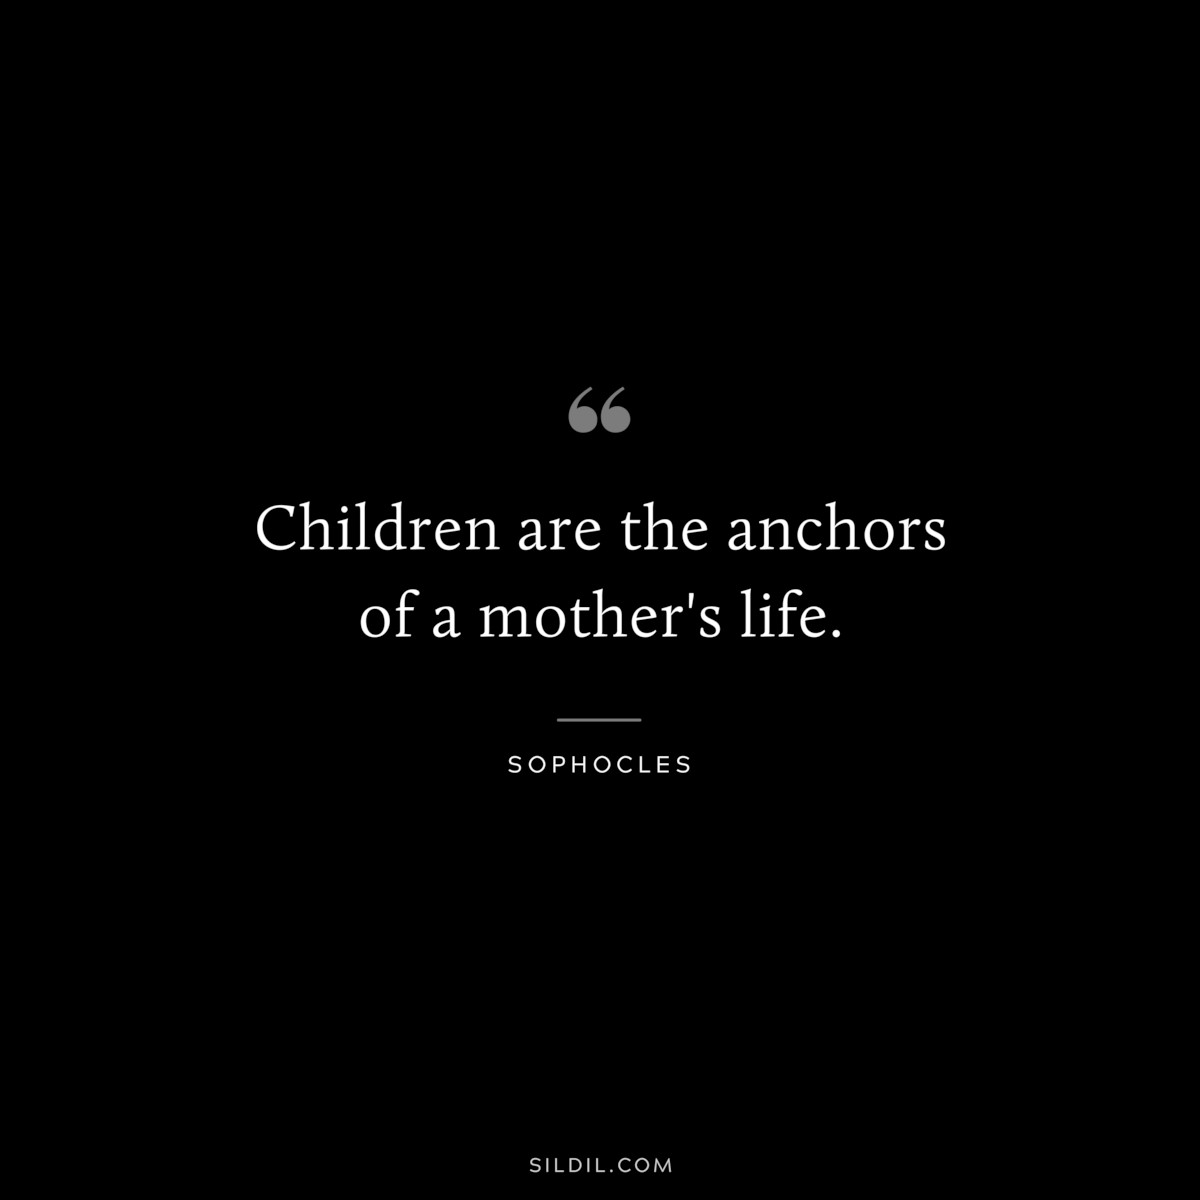 Children are the anchors of a mother's life. ― Sophocles